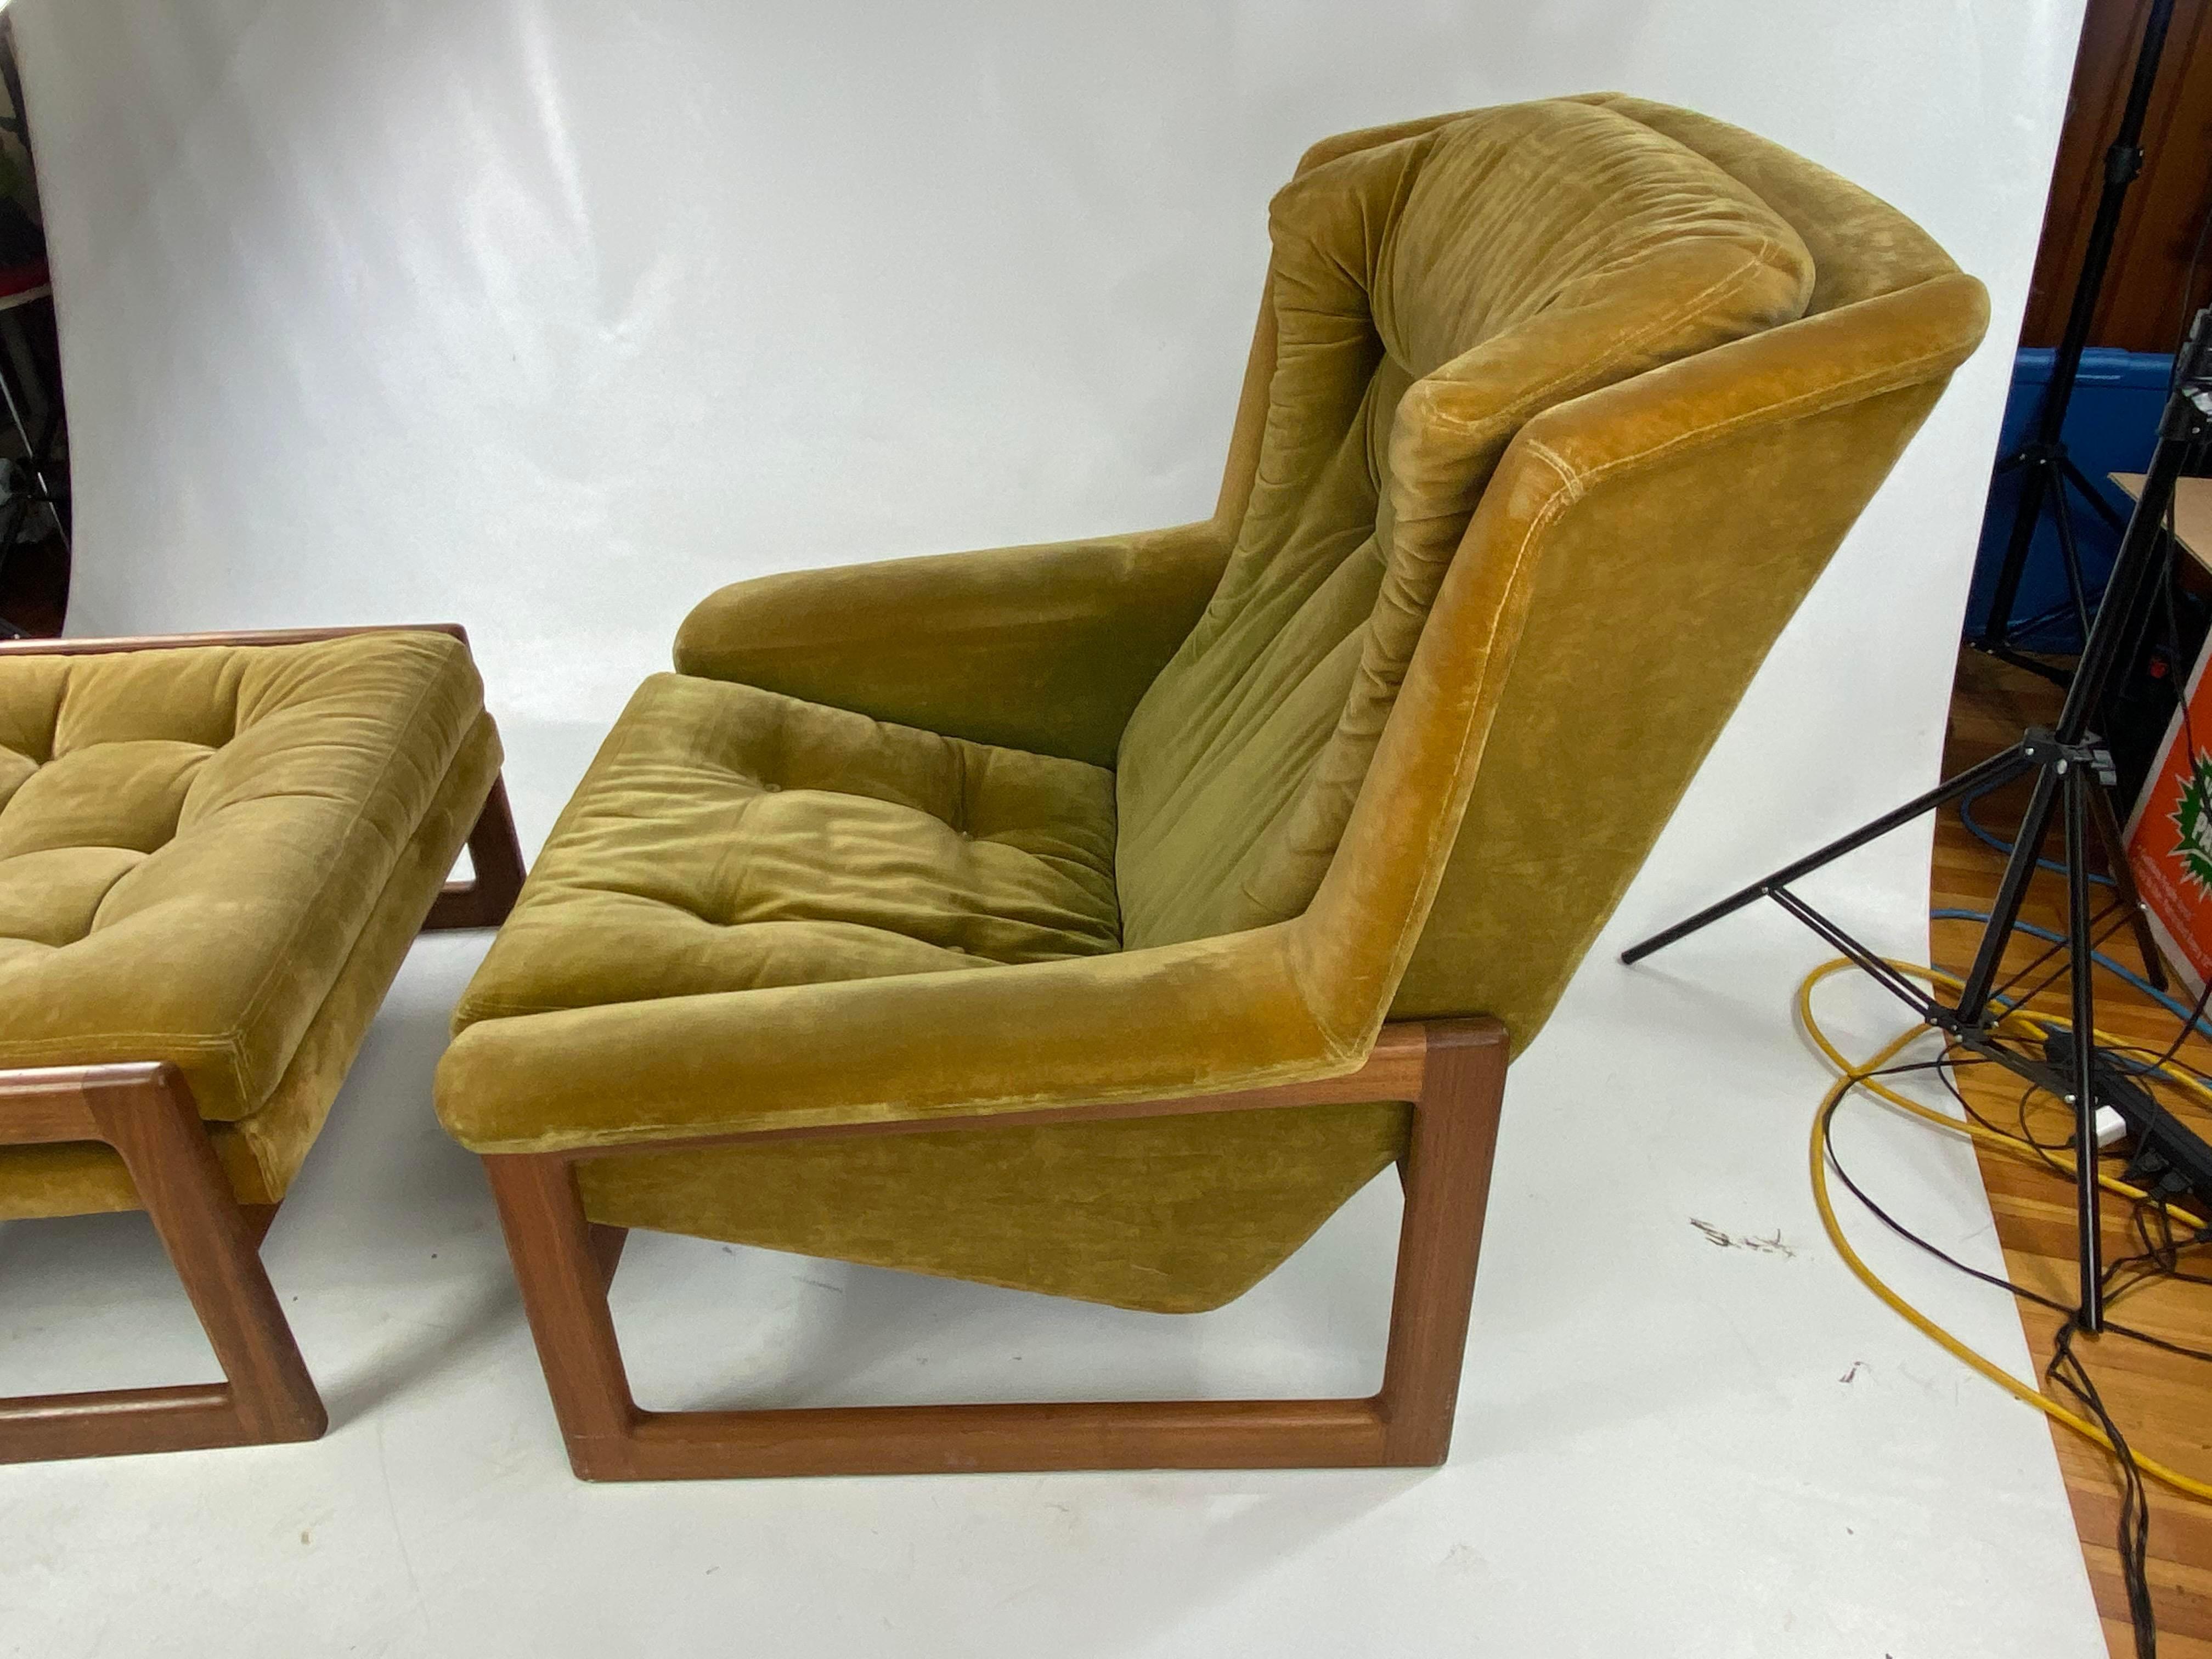 Very nice large stylish lounge chair made by DUX. Great lines and form. Absolutely stunning. Base is made out of walnut. Stool measures. Measures: Depth 22” height 16”, width 29.5.